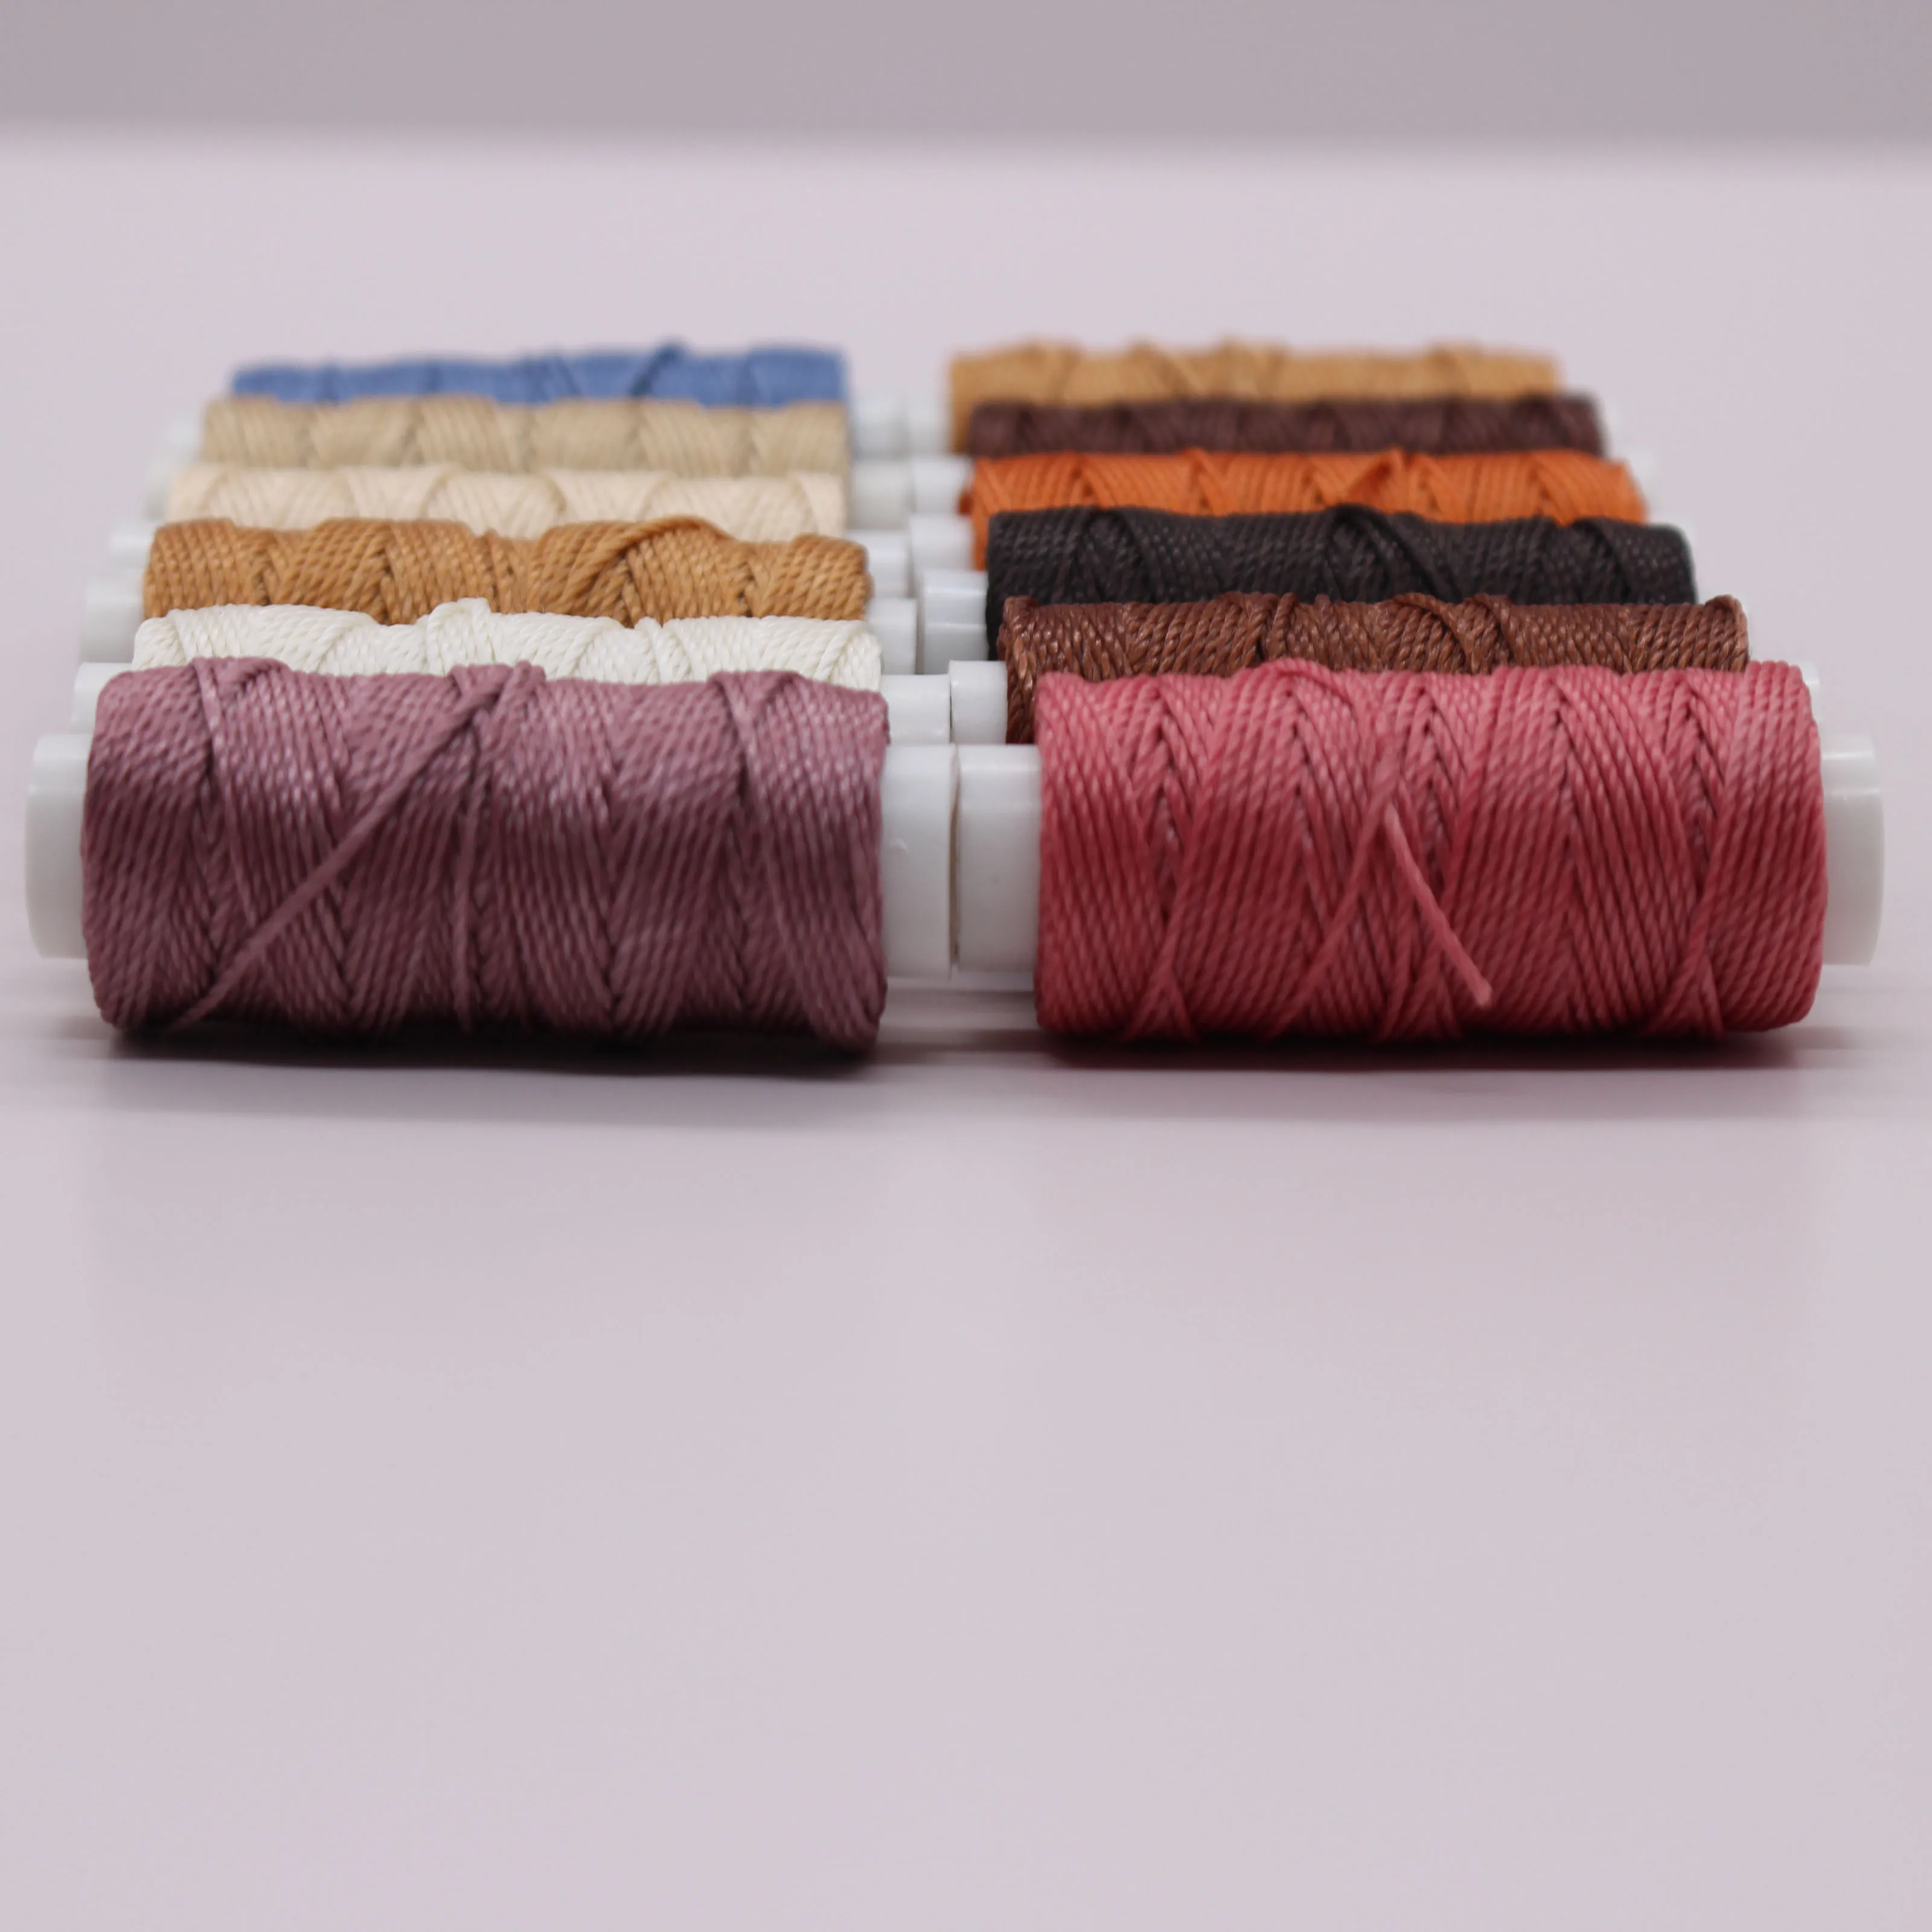 Wholesale 0.8mm 15meters Leather Sewing Waxed Thread Waxed Thread Practical Long Stitching Thread for Leather Craft DIY